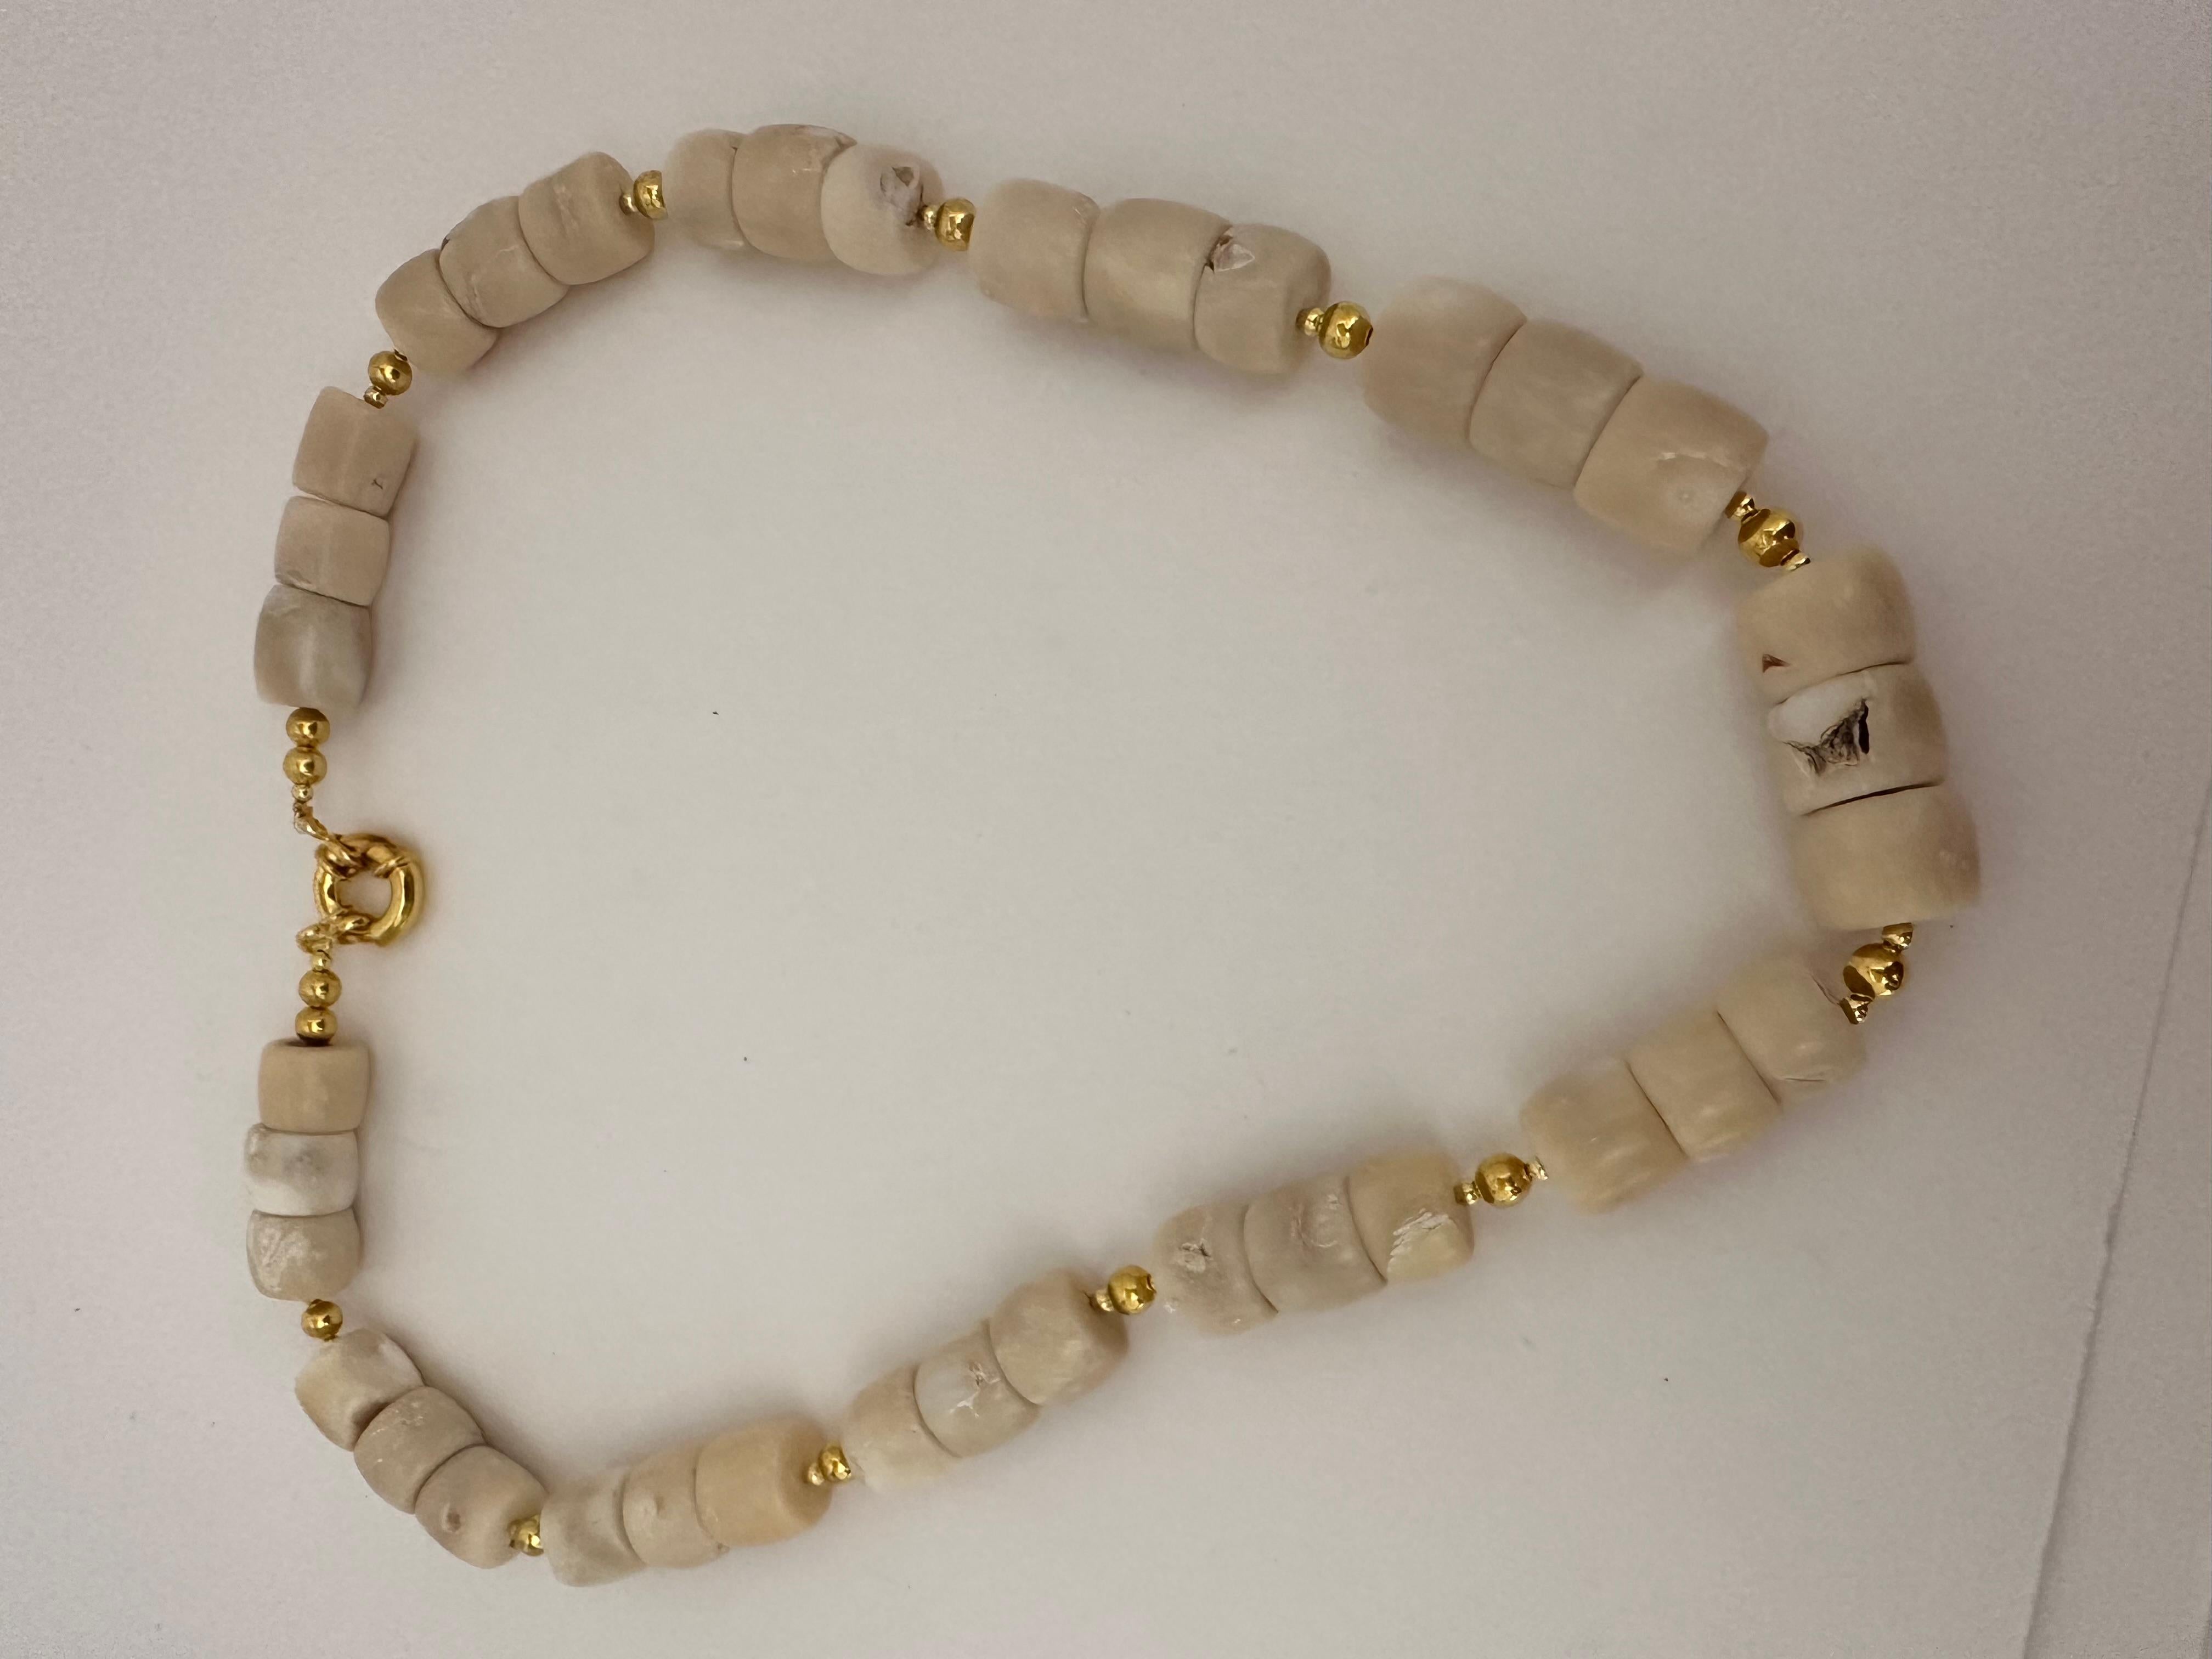 Handmade Gold Plated Beads & White Barrel Shape Coral Beaded 24